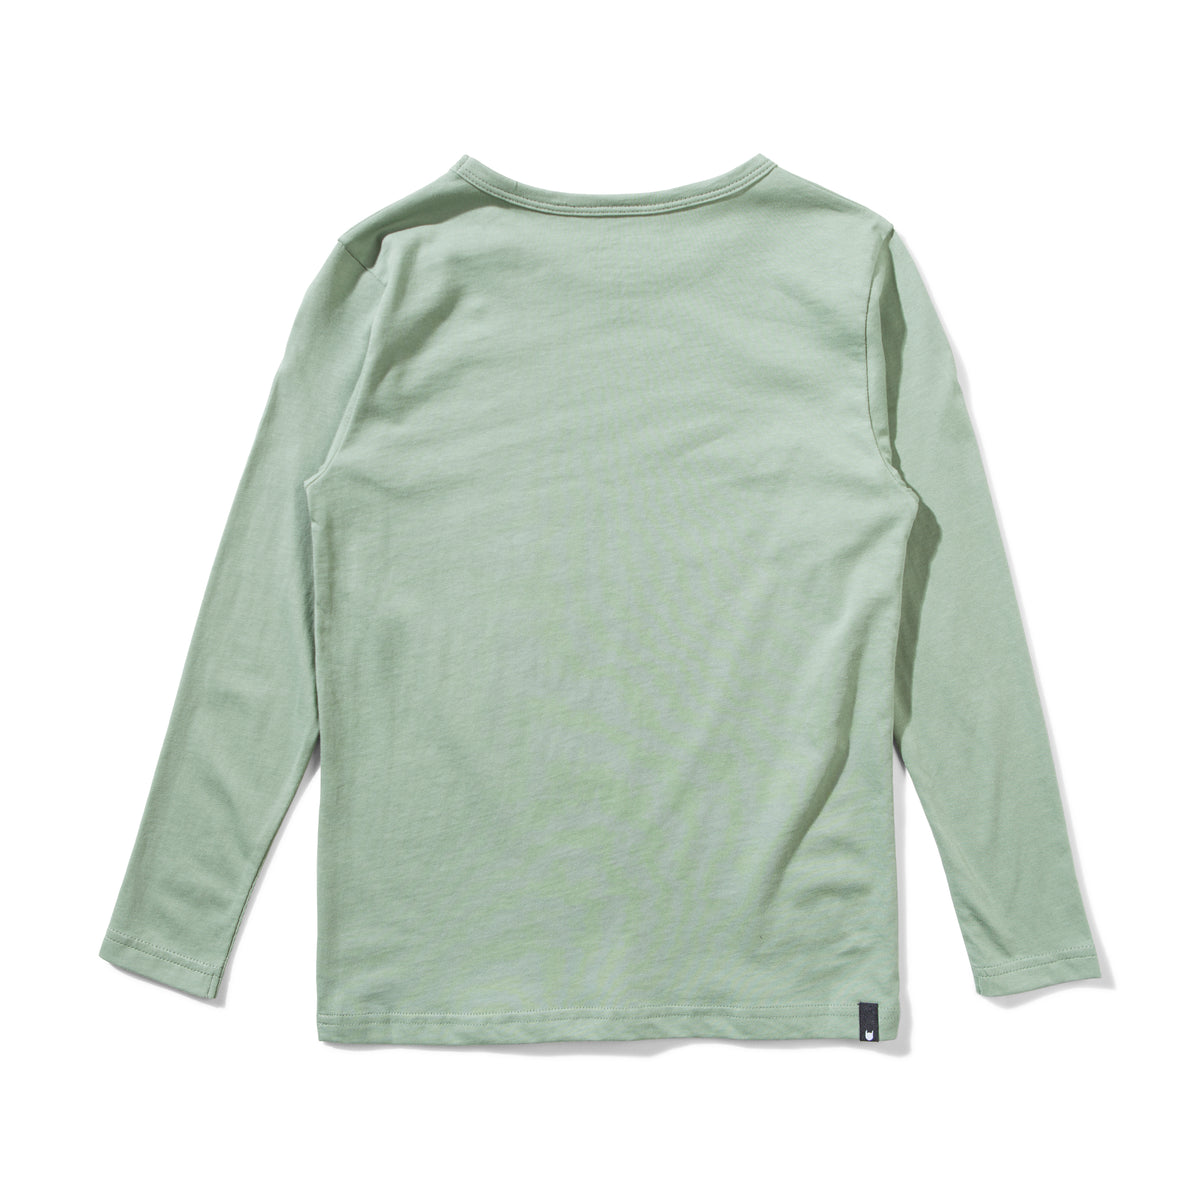 Munster Kids - Flag Pole L/S Tee in Shale Green